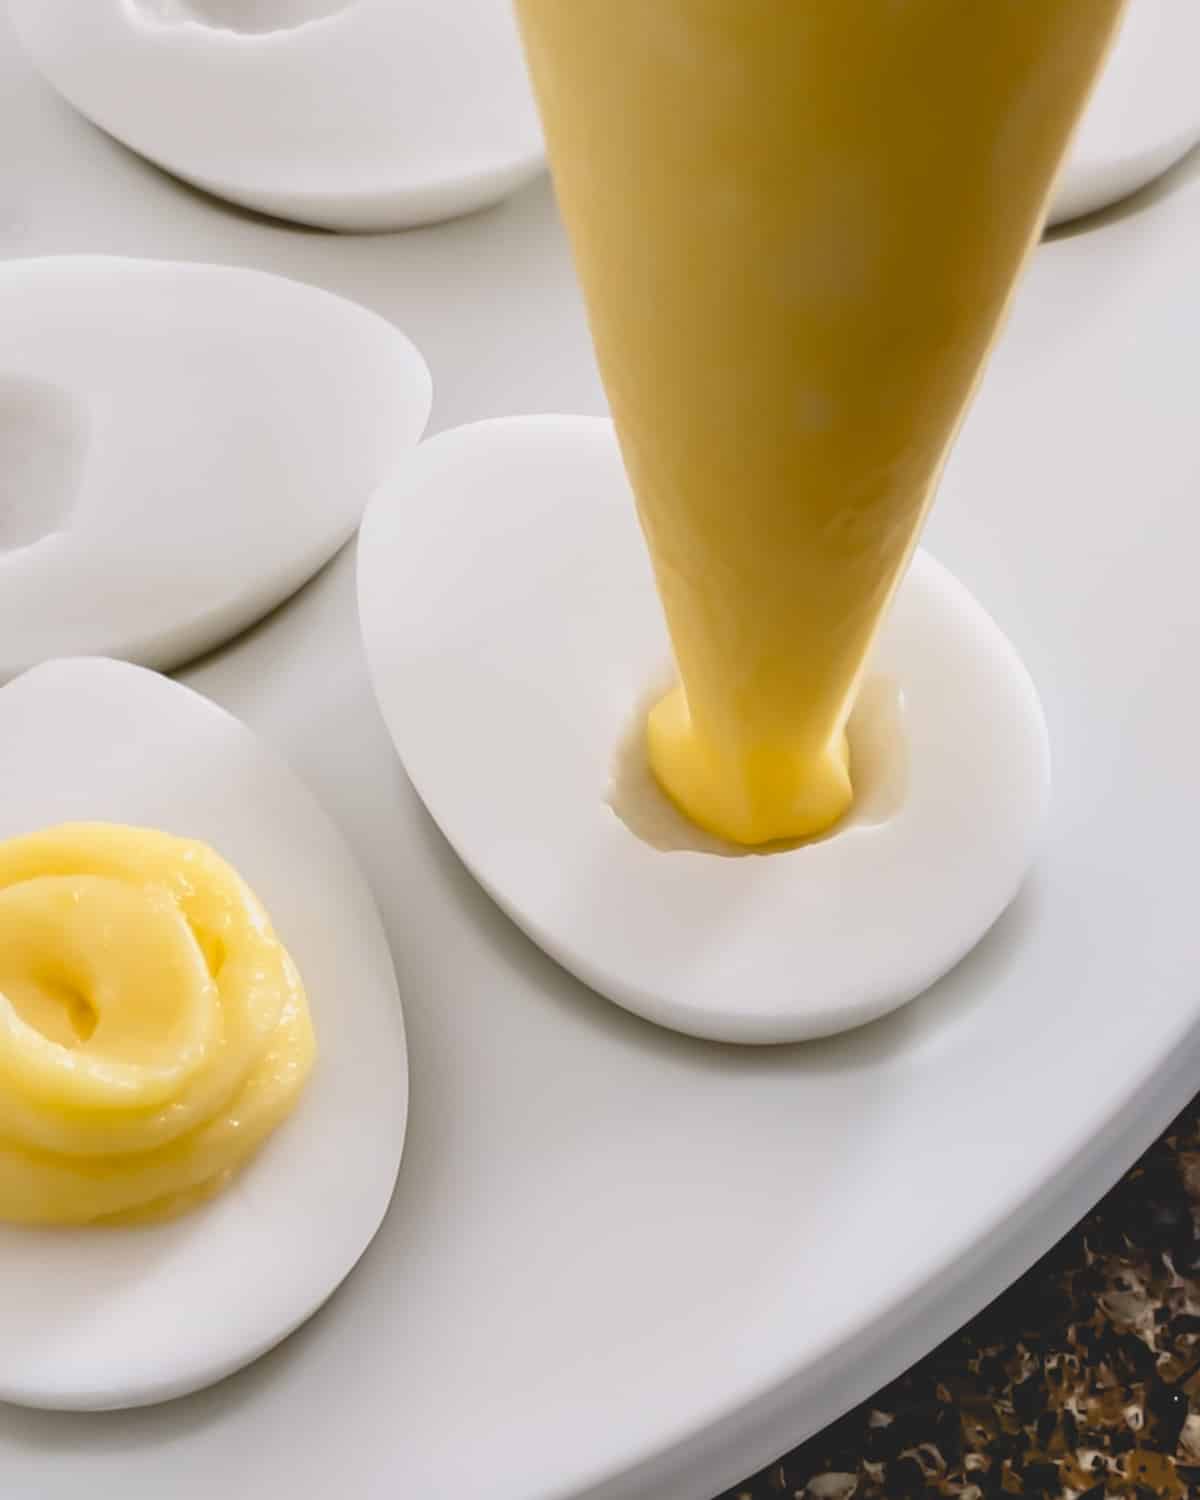 Yellow filling piped into the well on a egg-shaped coconut pudding.